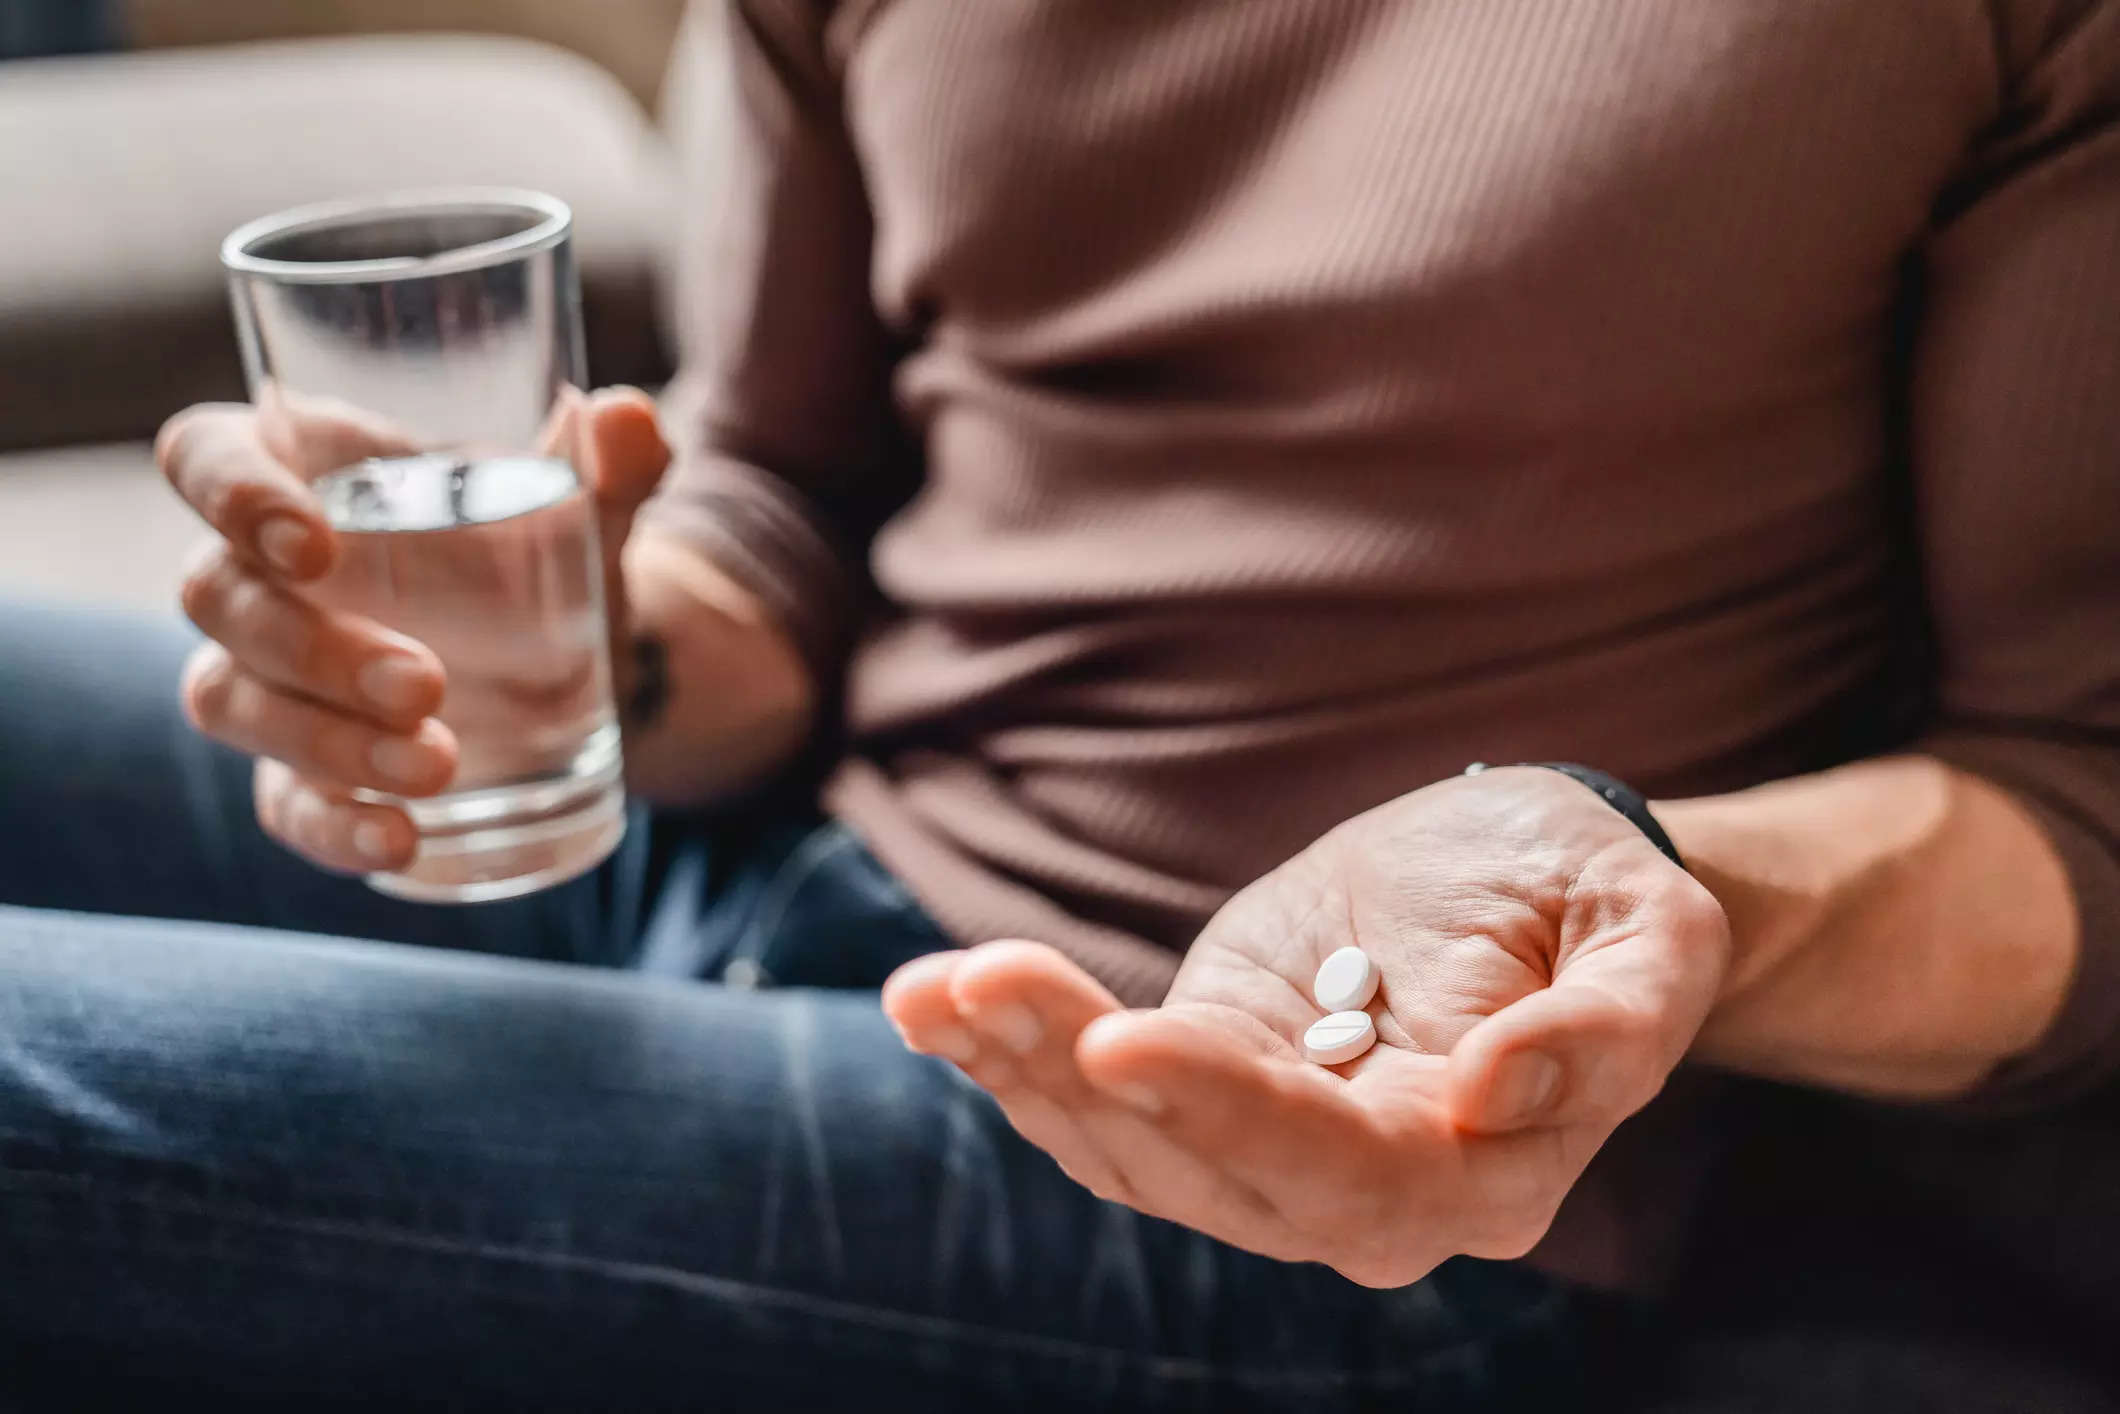 According to a new study, common painkillers can have unexpected and unexplained impacts on numerous conditions, including heart disease and cancer, even at equal doses.